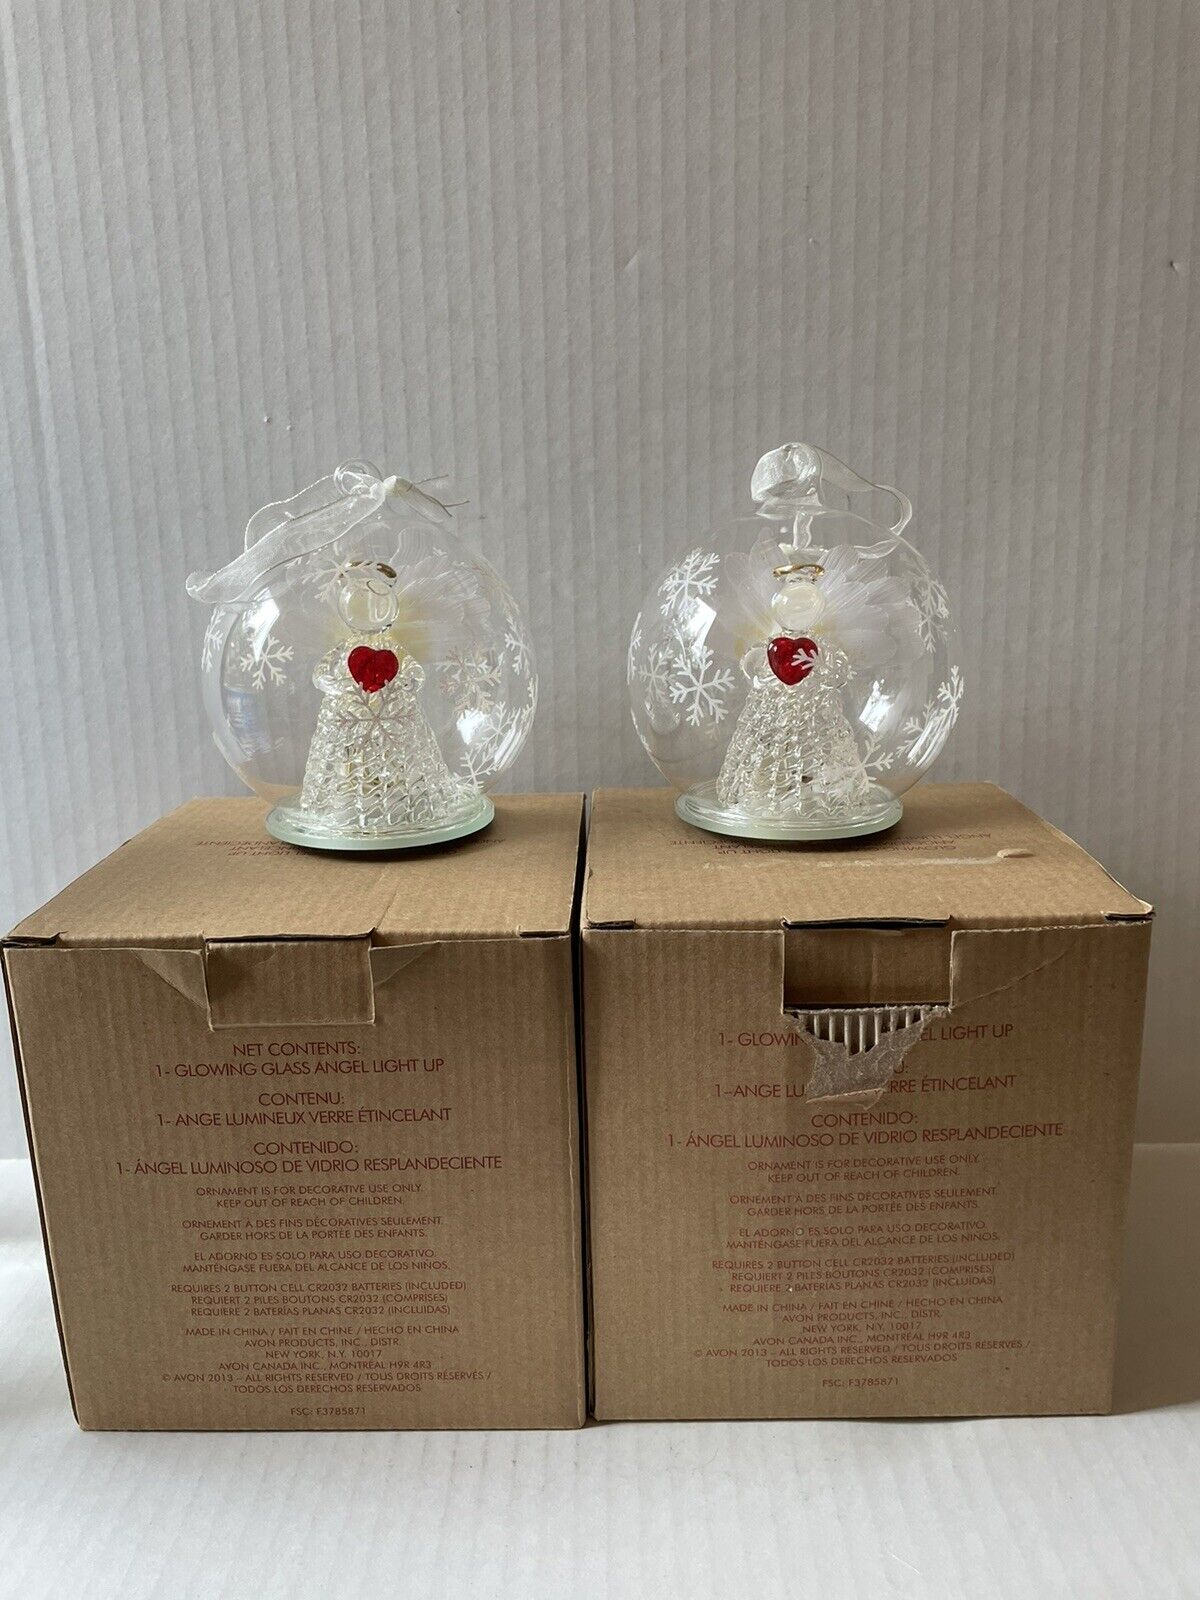 2013 AVON GLASS ANGEL HOLDING HEART LIGHT-UP ORNAMENT With Snowflakes Pair